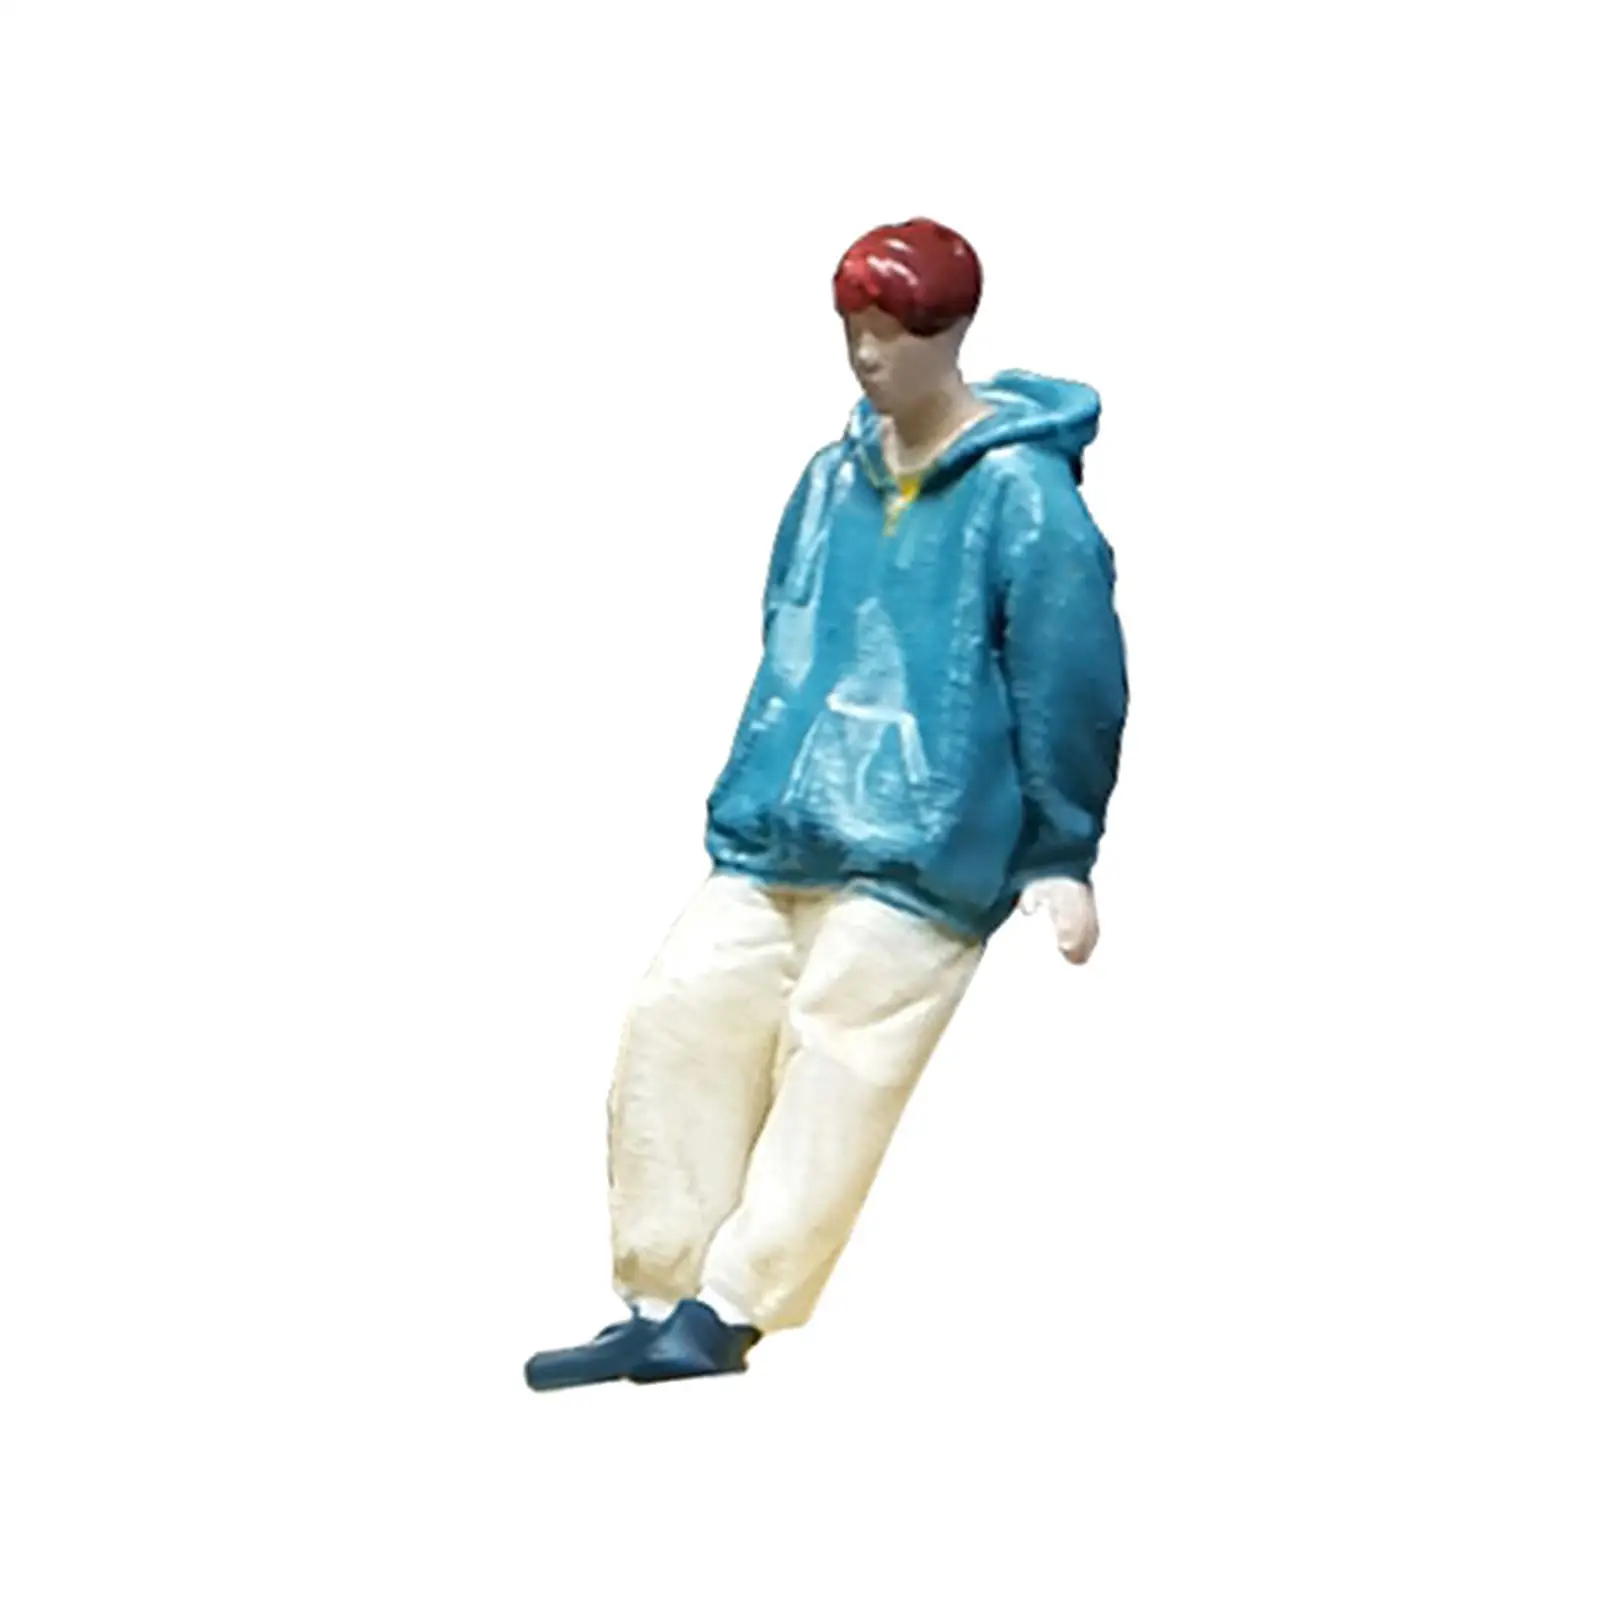 1/64 Resin Boys Model Street Figure, Diorama Action Figurines, Collectibles Scene Props